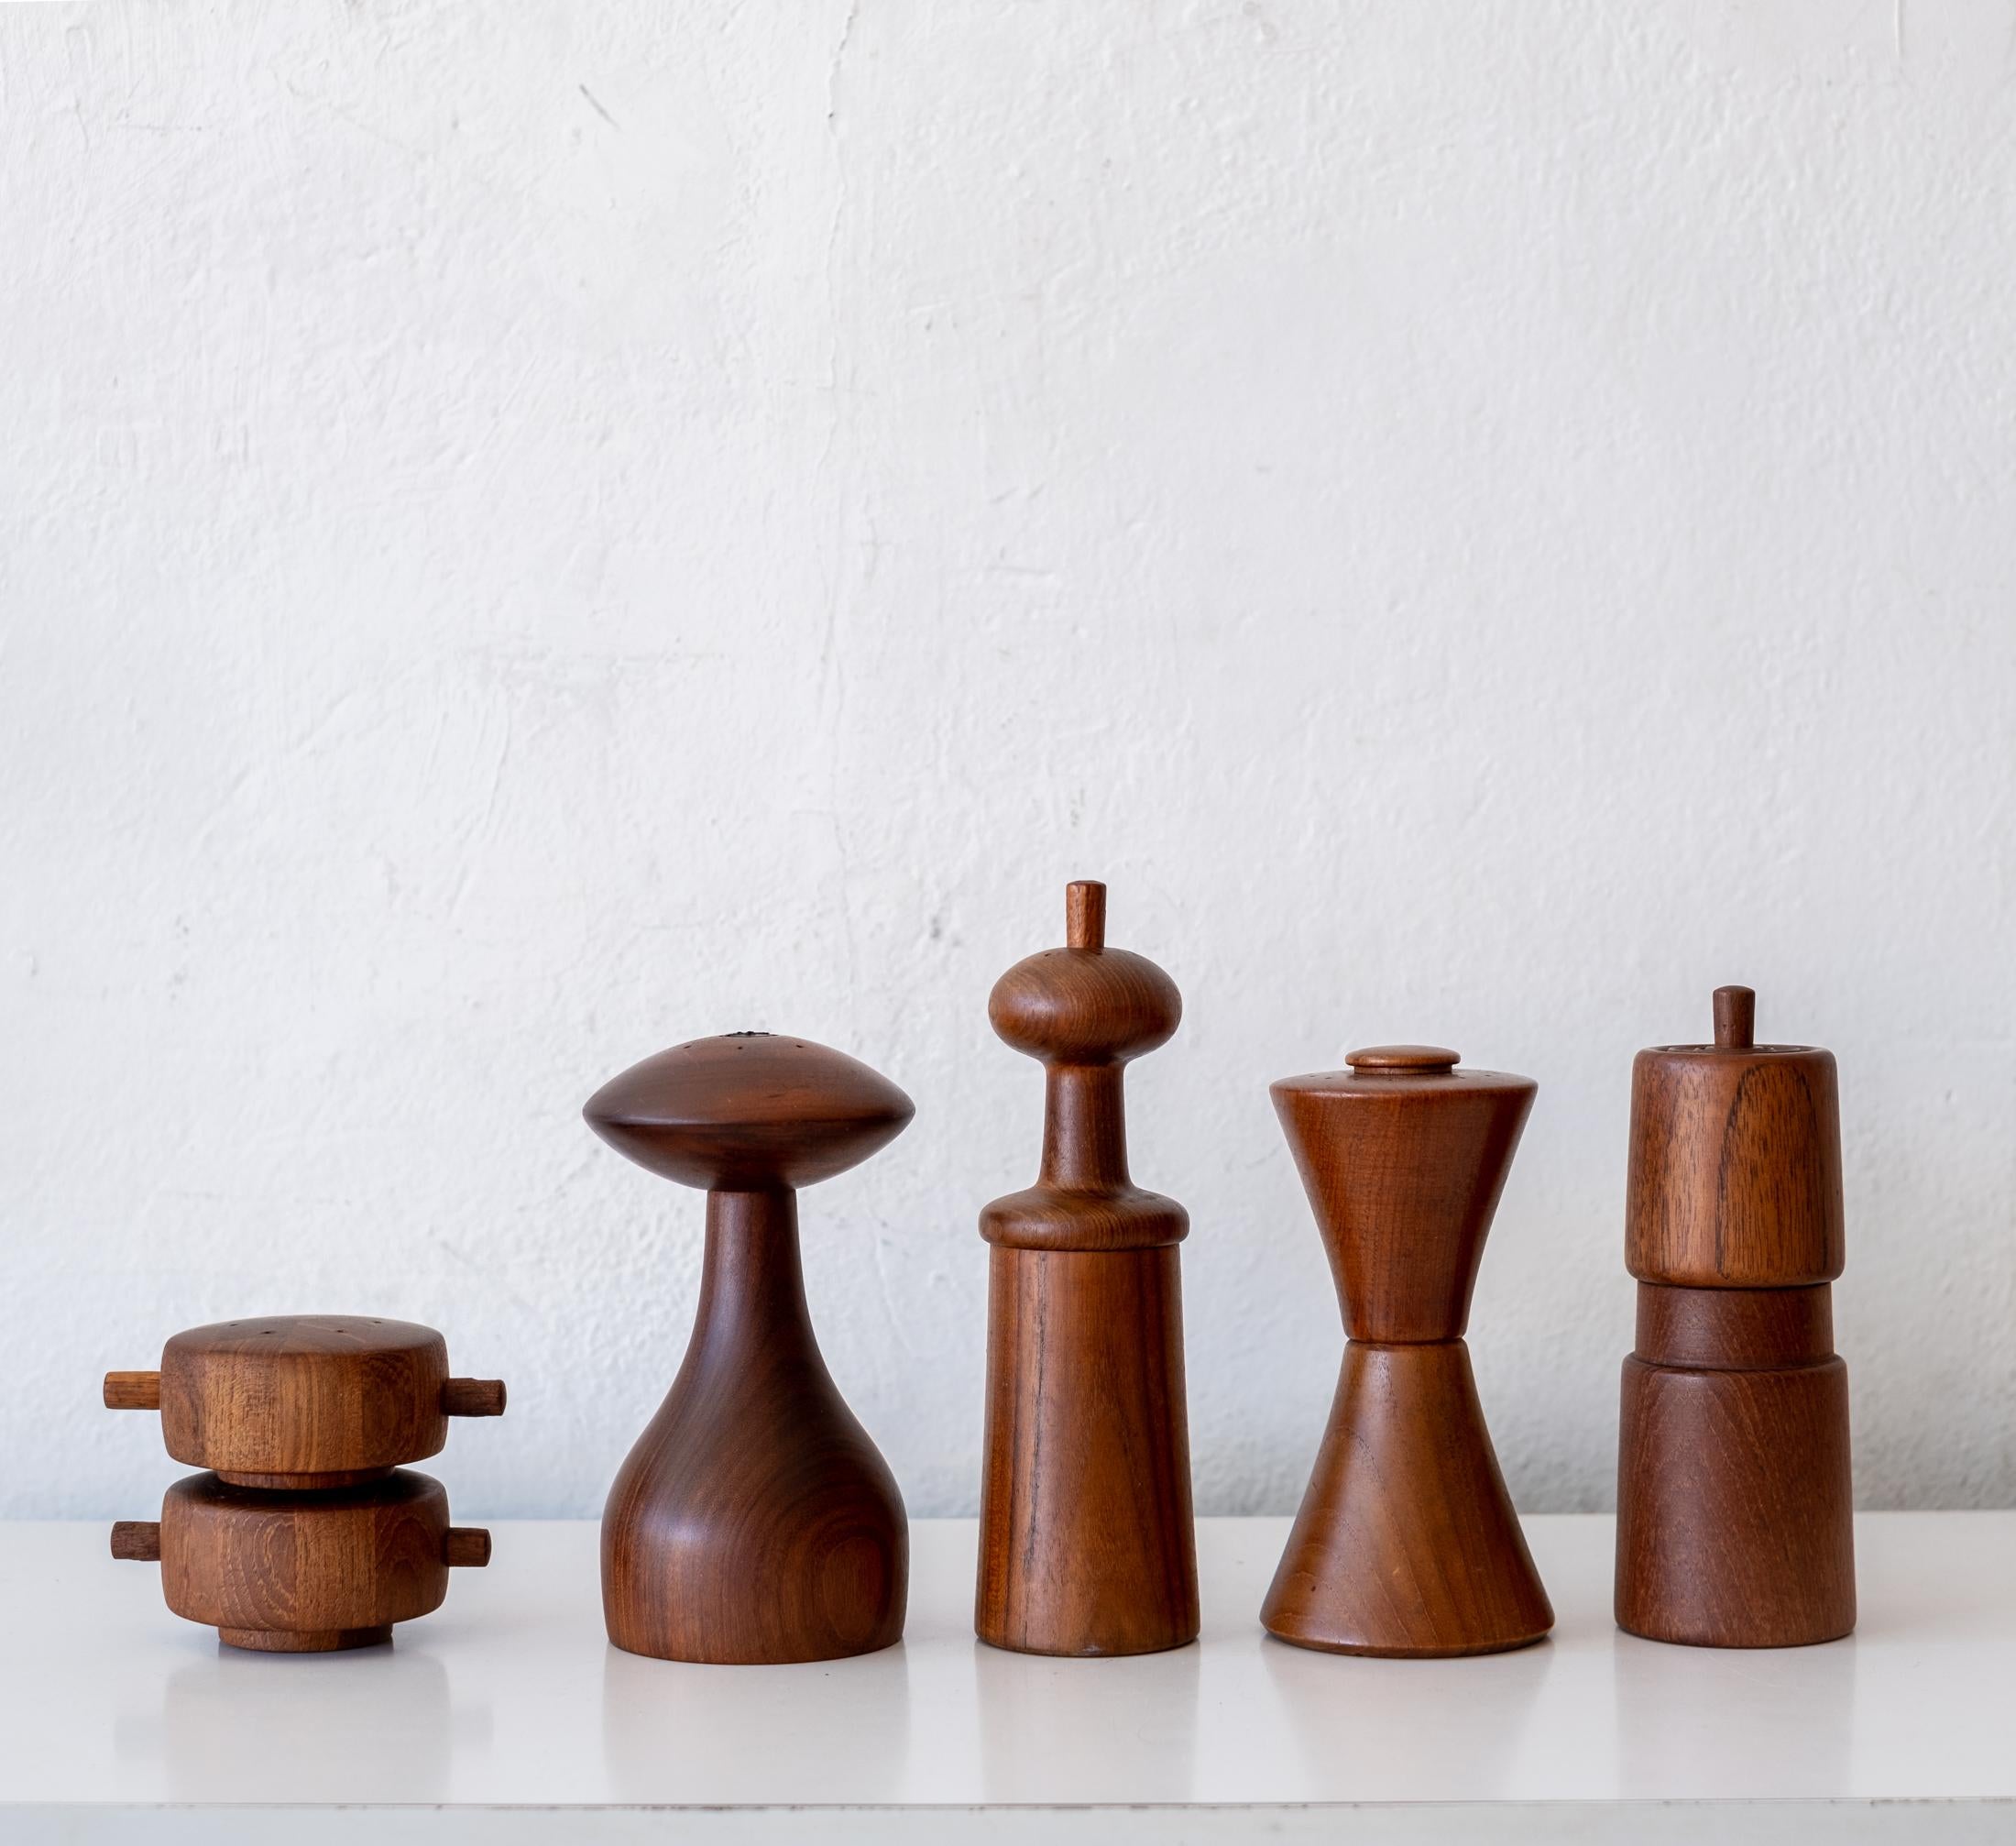 Collection of five teak pepper mills by Jens Quistgaard. Early metal grinding mechanisms produced by Peugeot. All mills were produced by Dansk in Denmark. Circa 1960s.